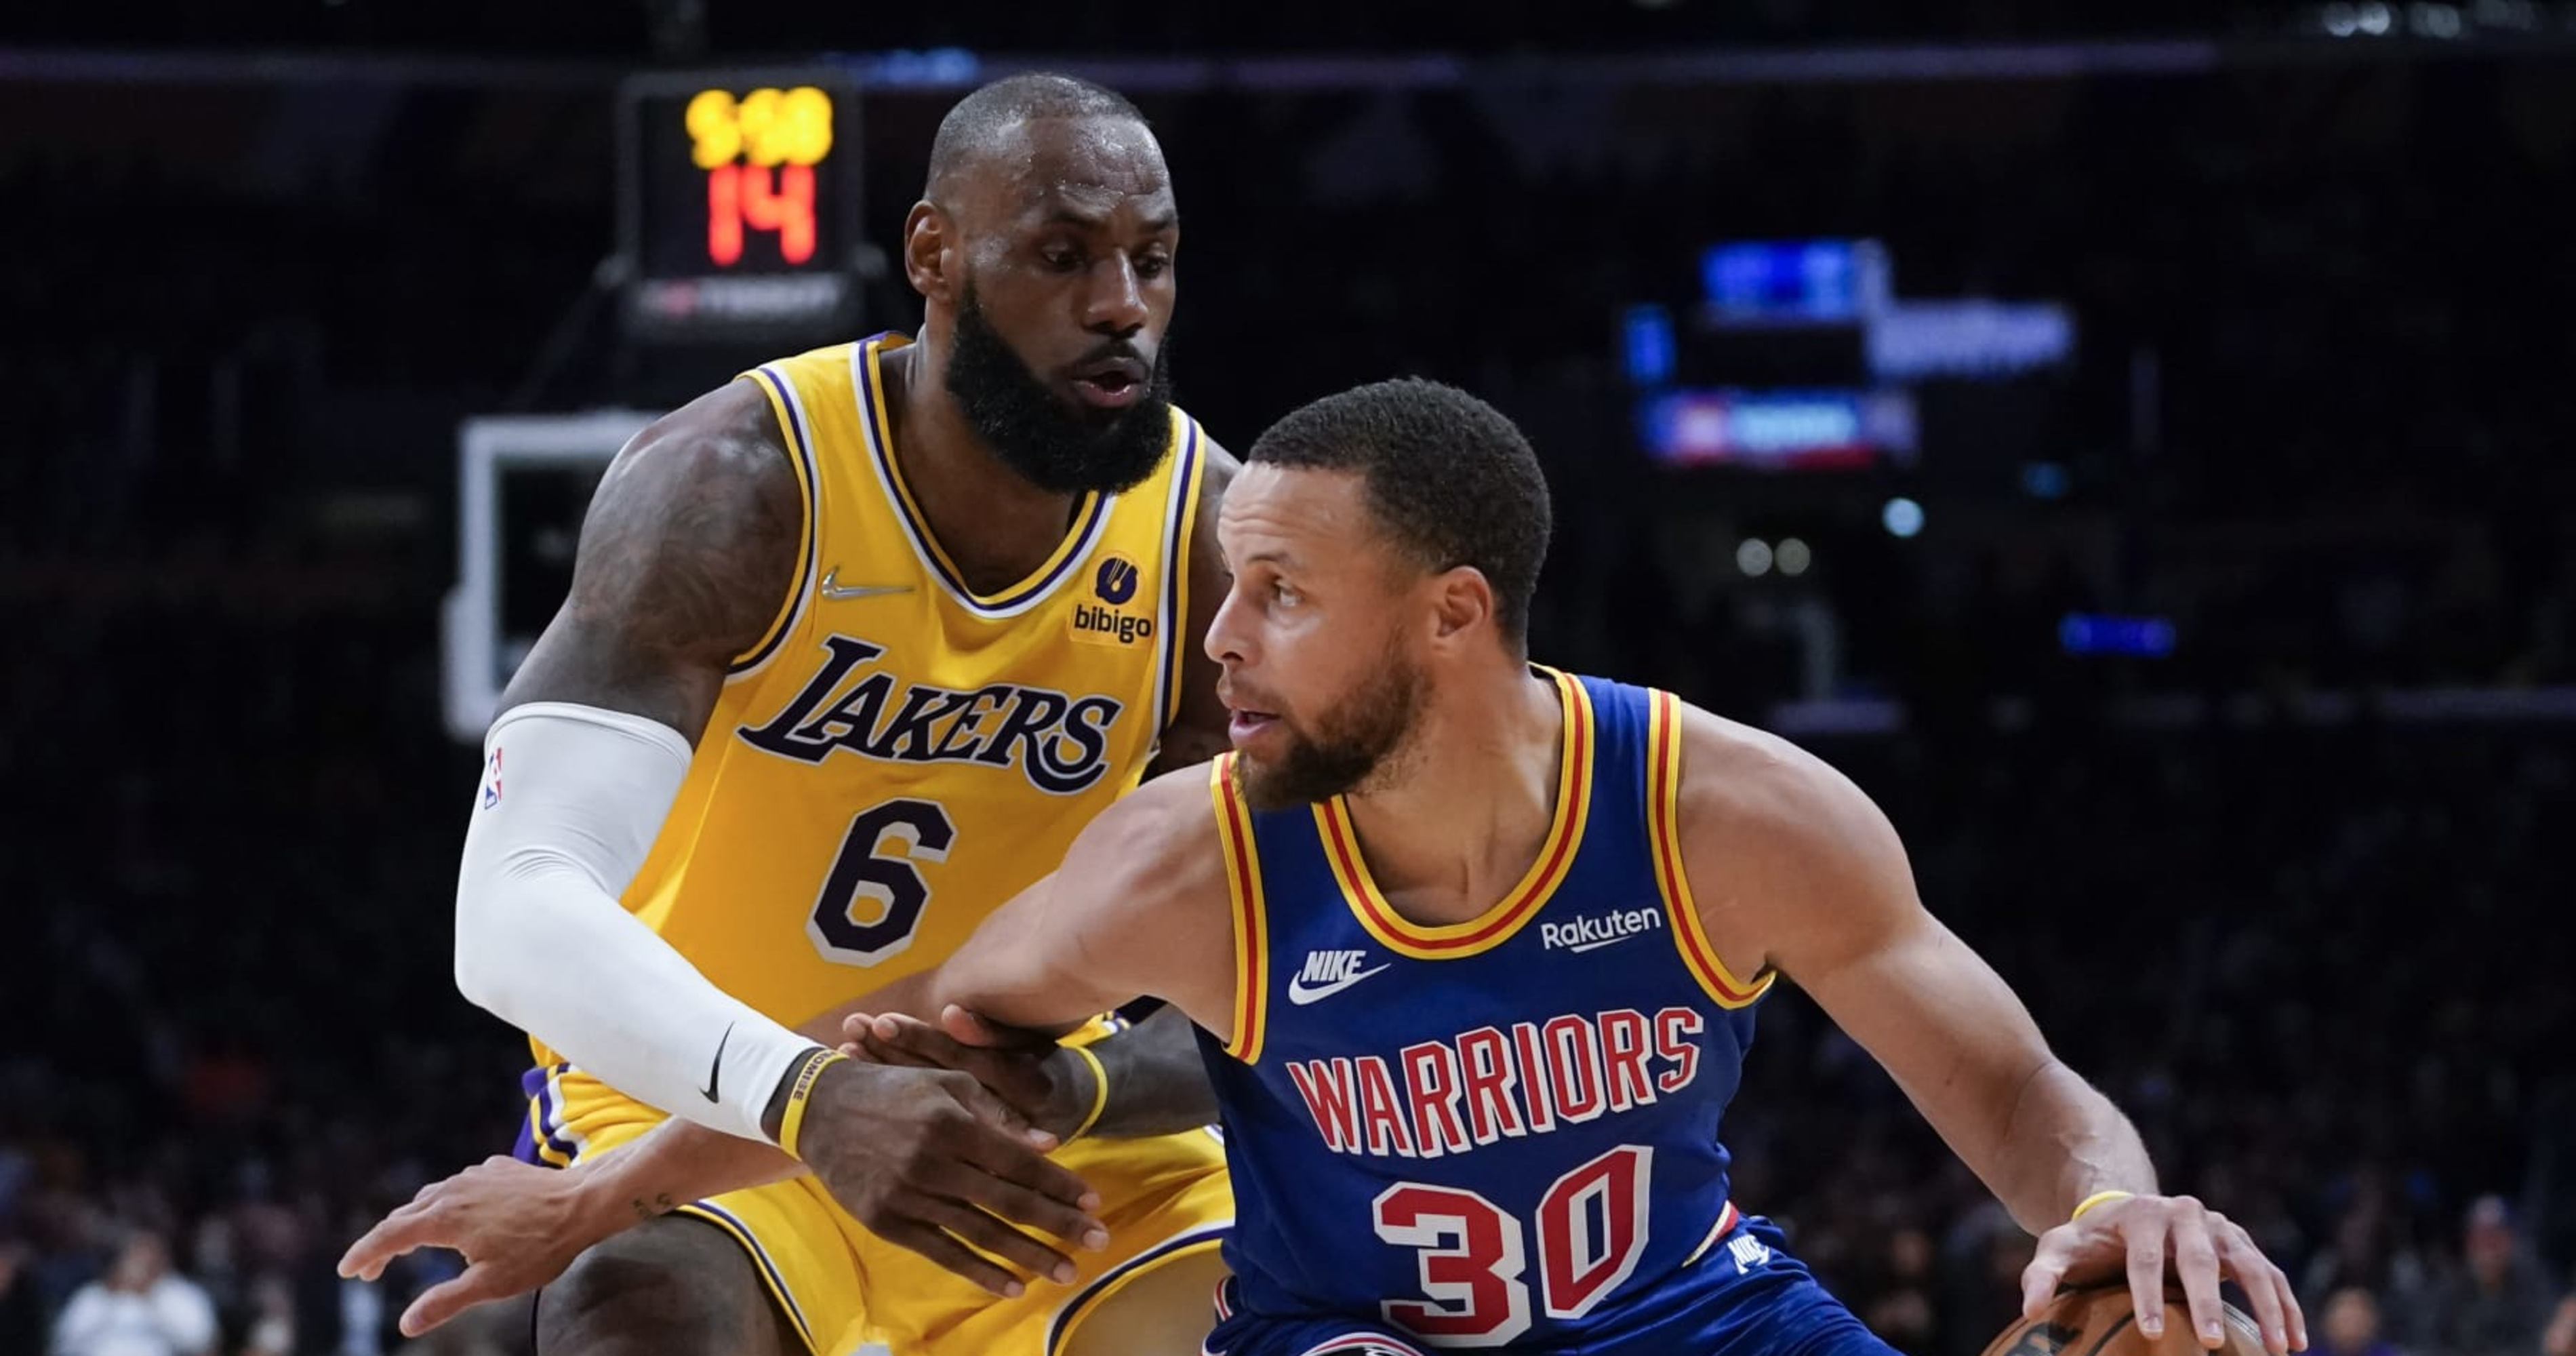 Los Angeles Lakers vs Golden State Warriors Oct 18, 2022 Game Summary